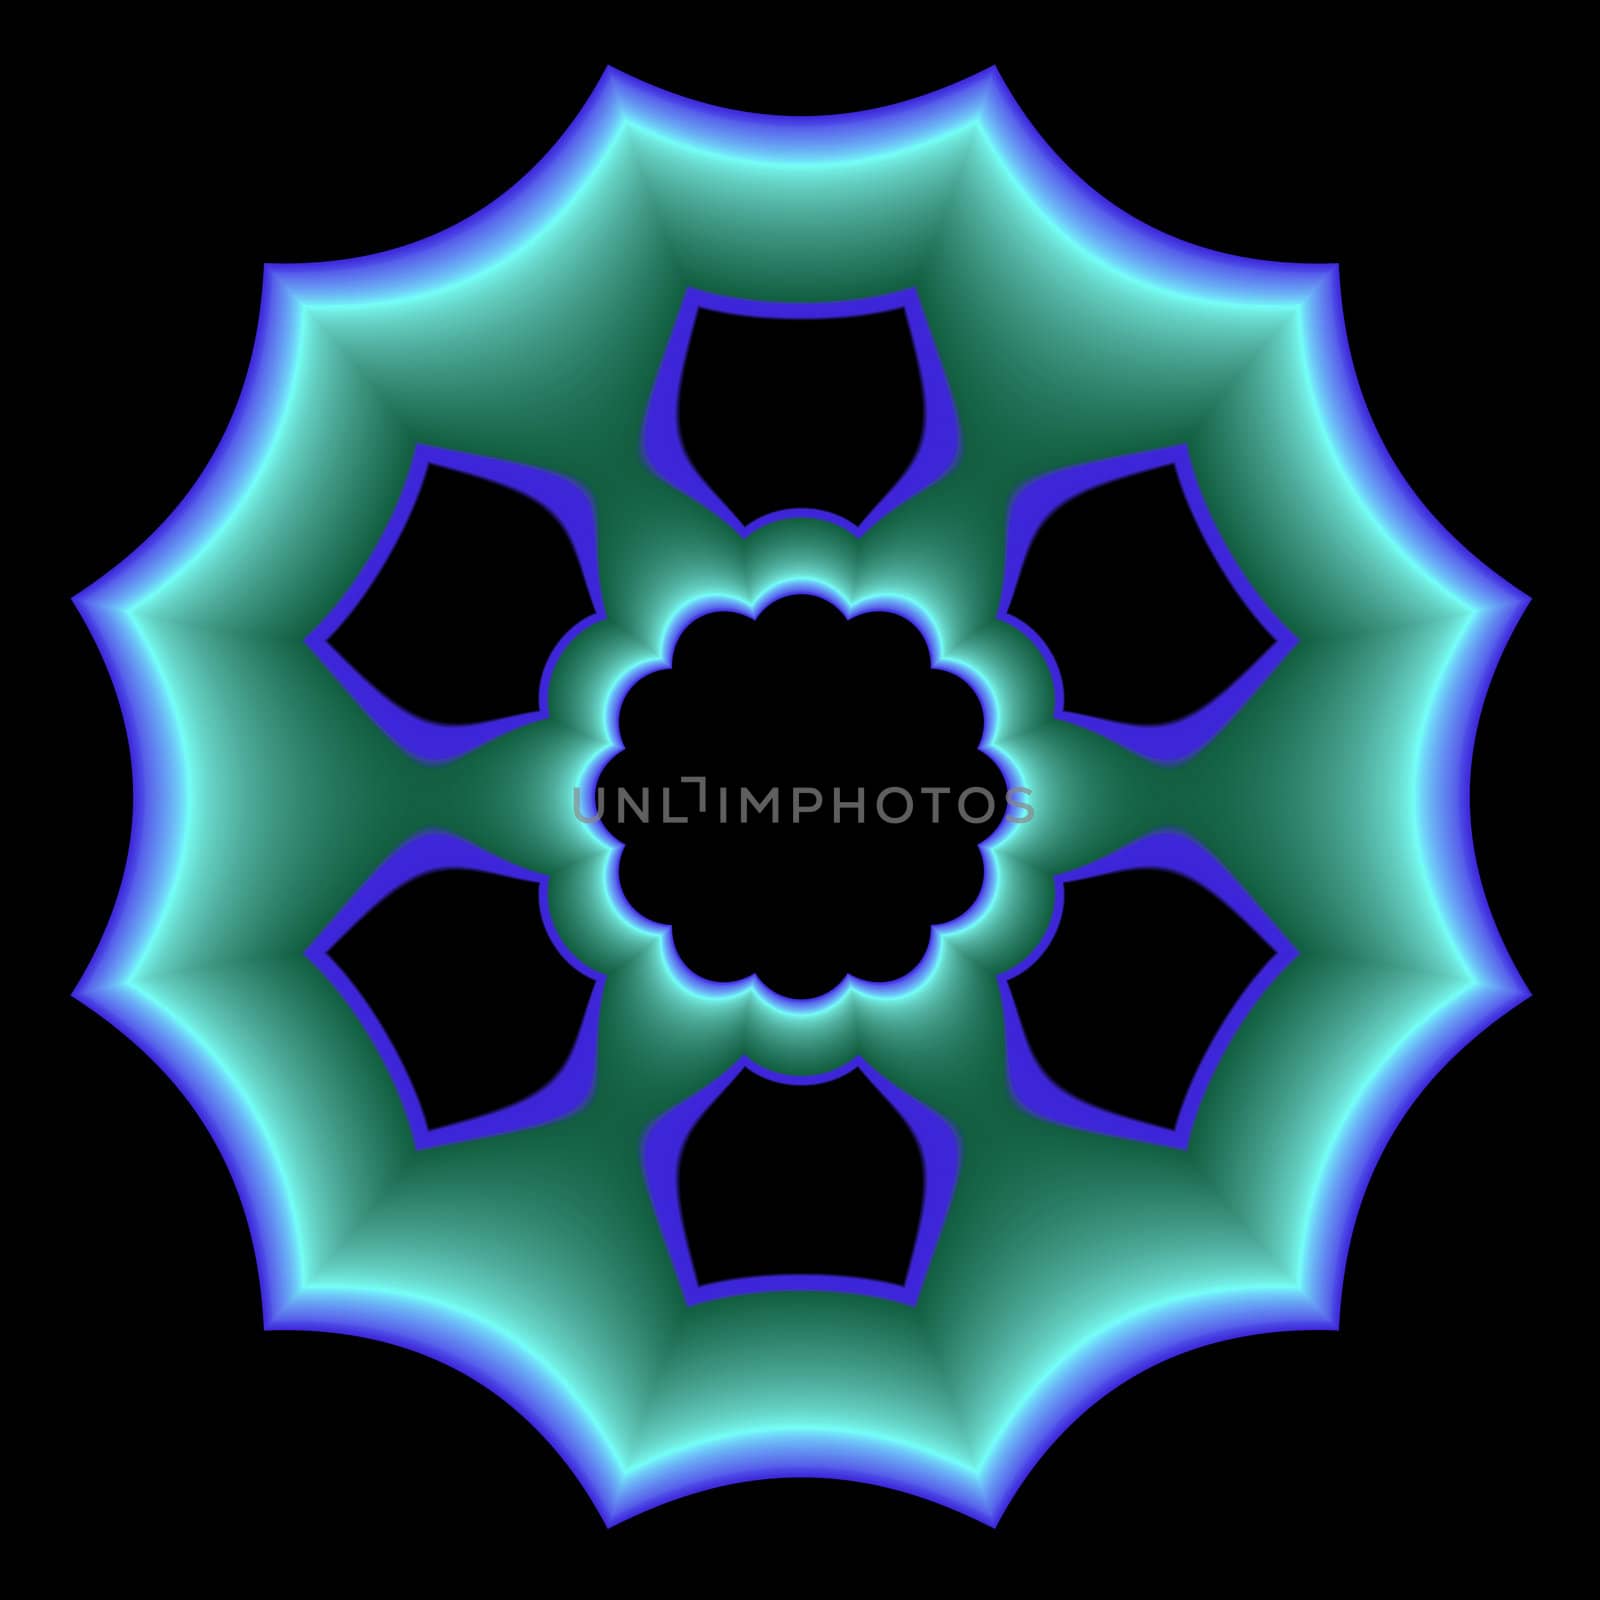 An abstract circular fractal done in shades of blue and green floating on a black background.